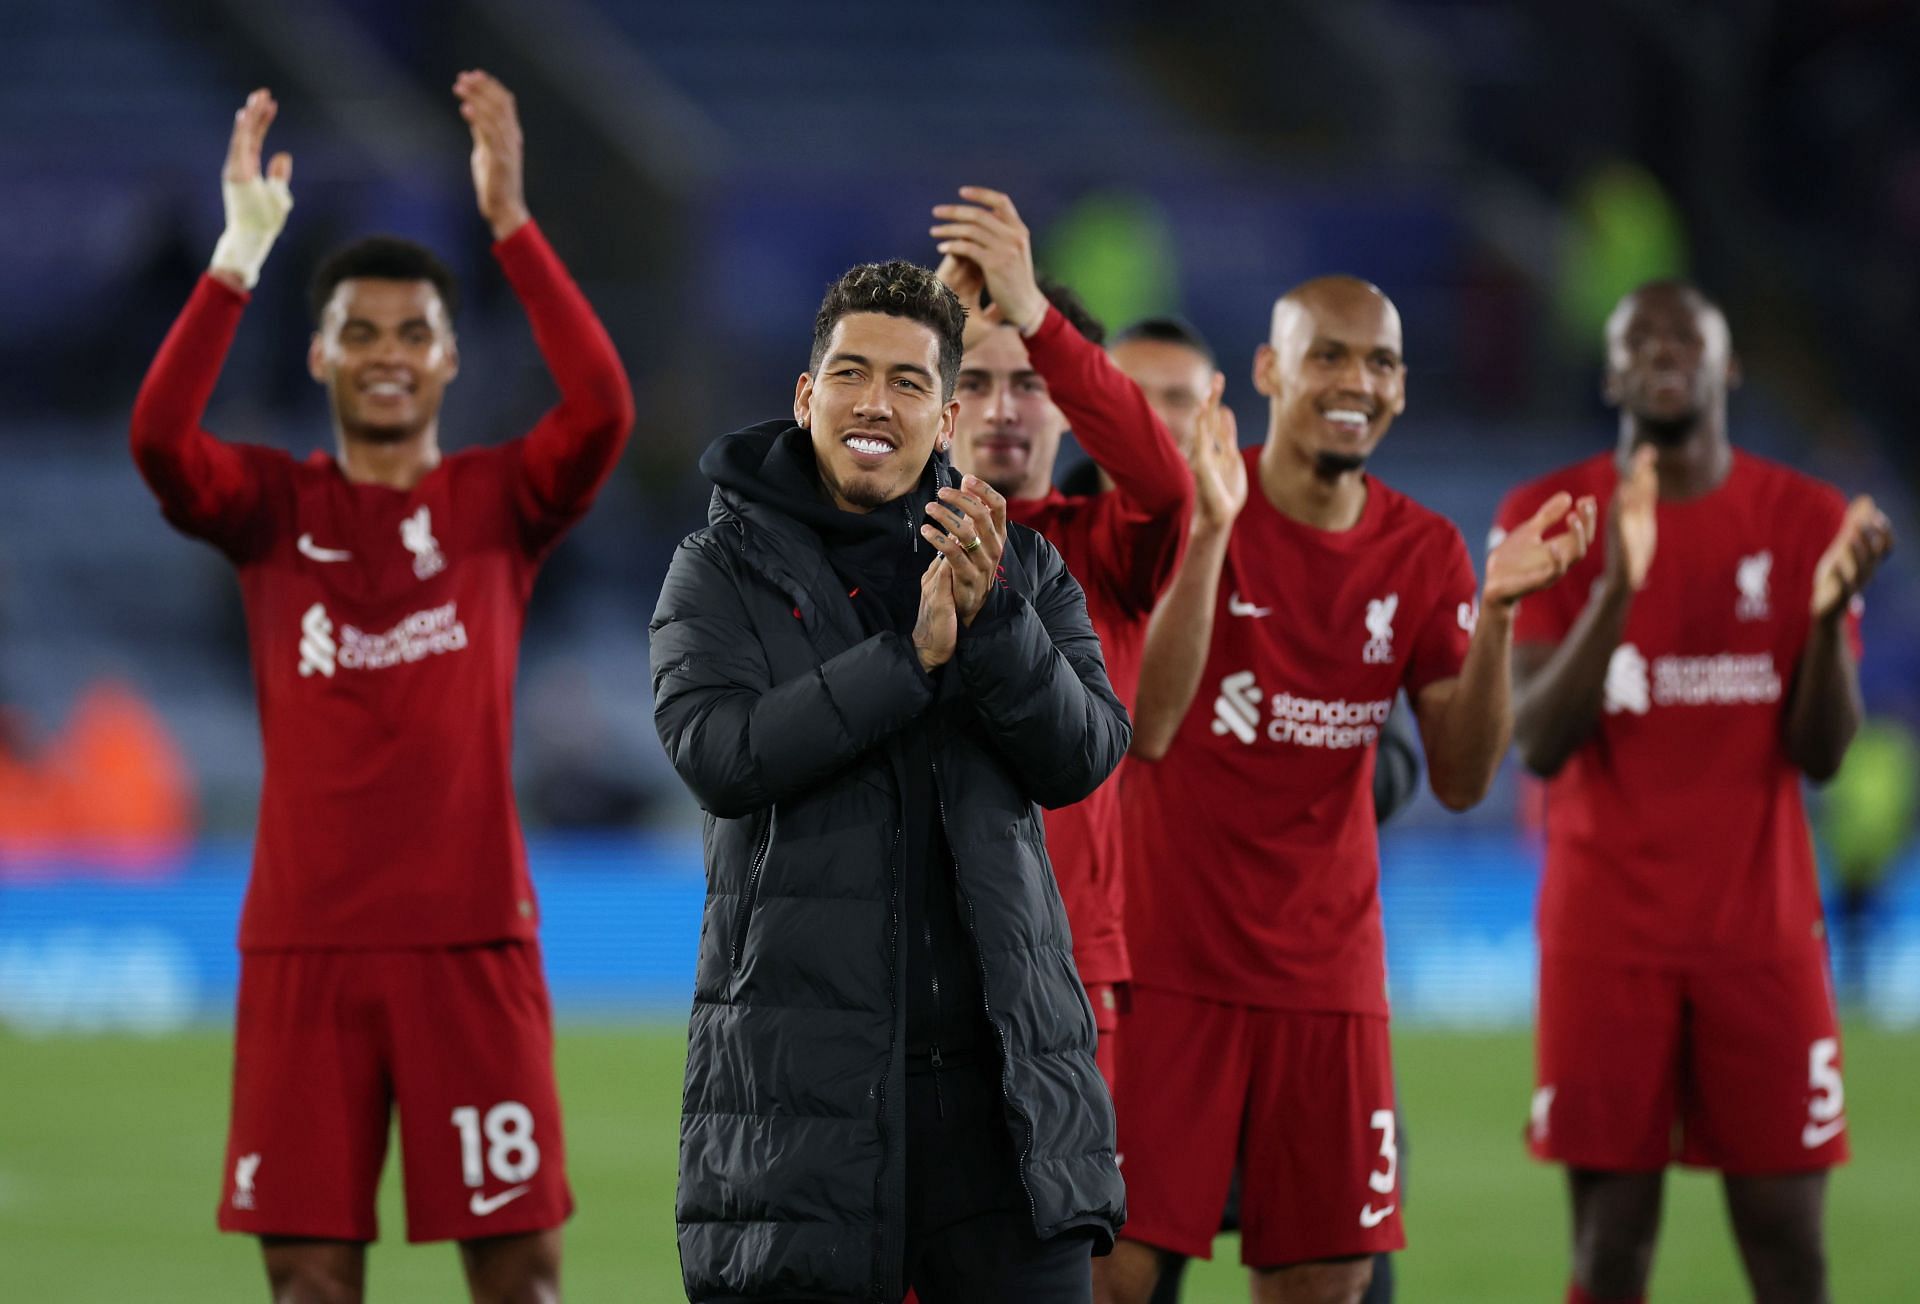 Roberto Firmino will receive a fond farewell from the Liverpool fans